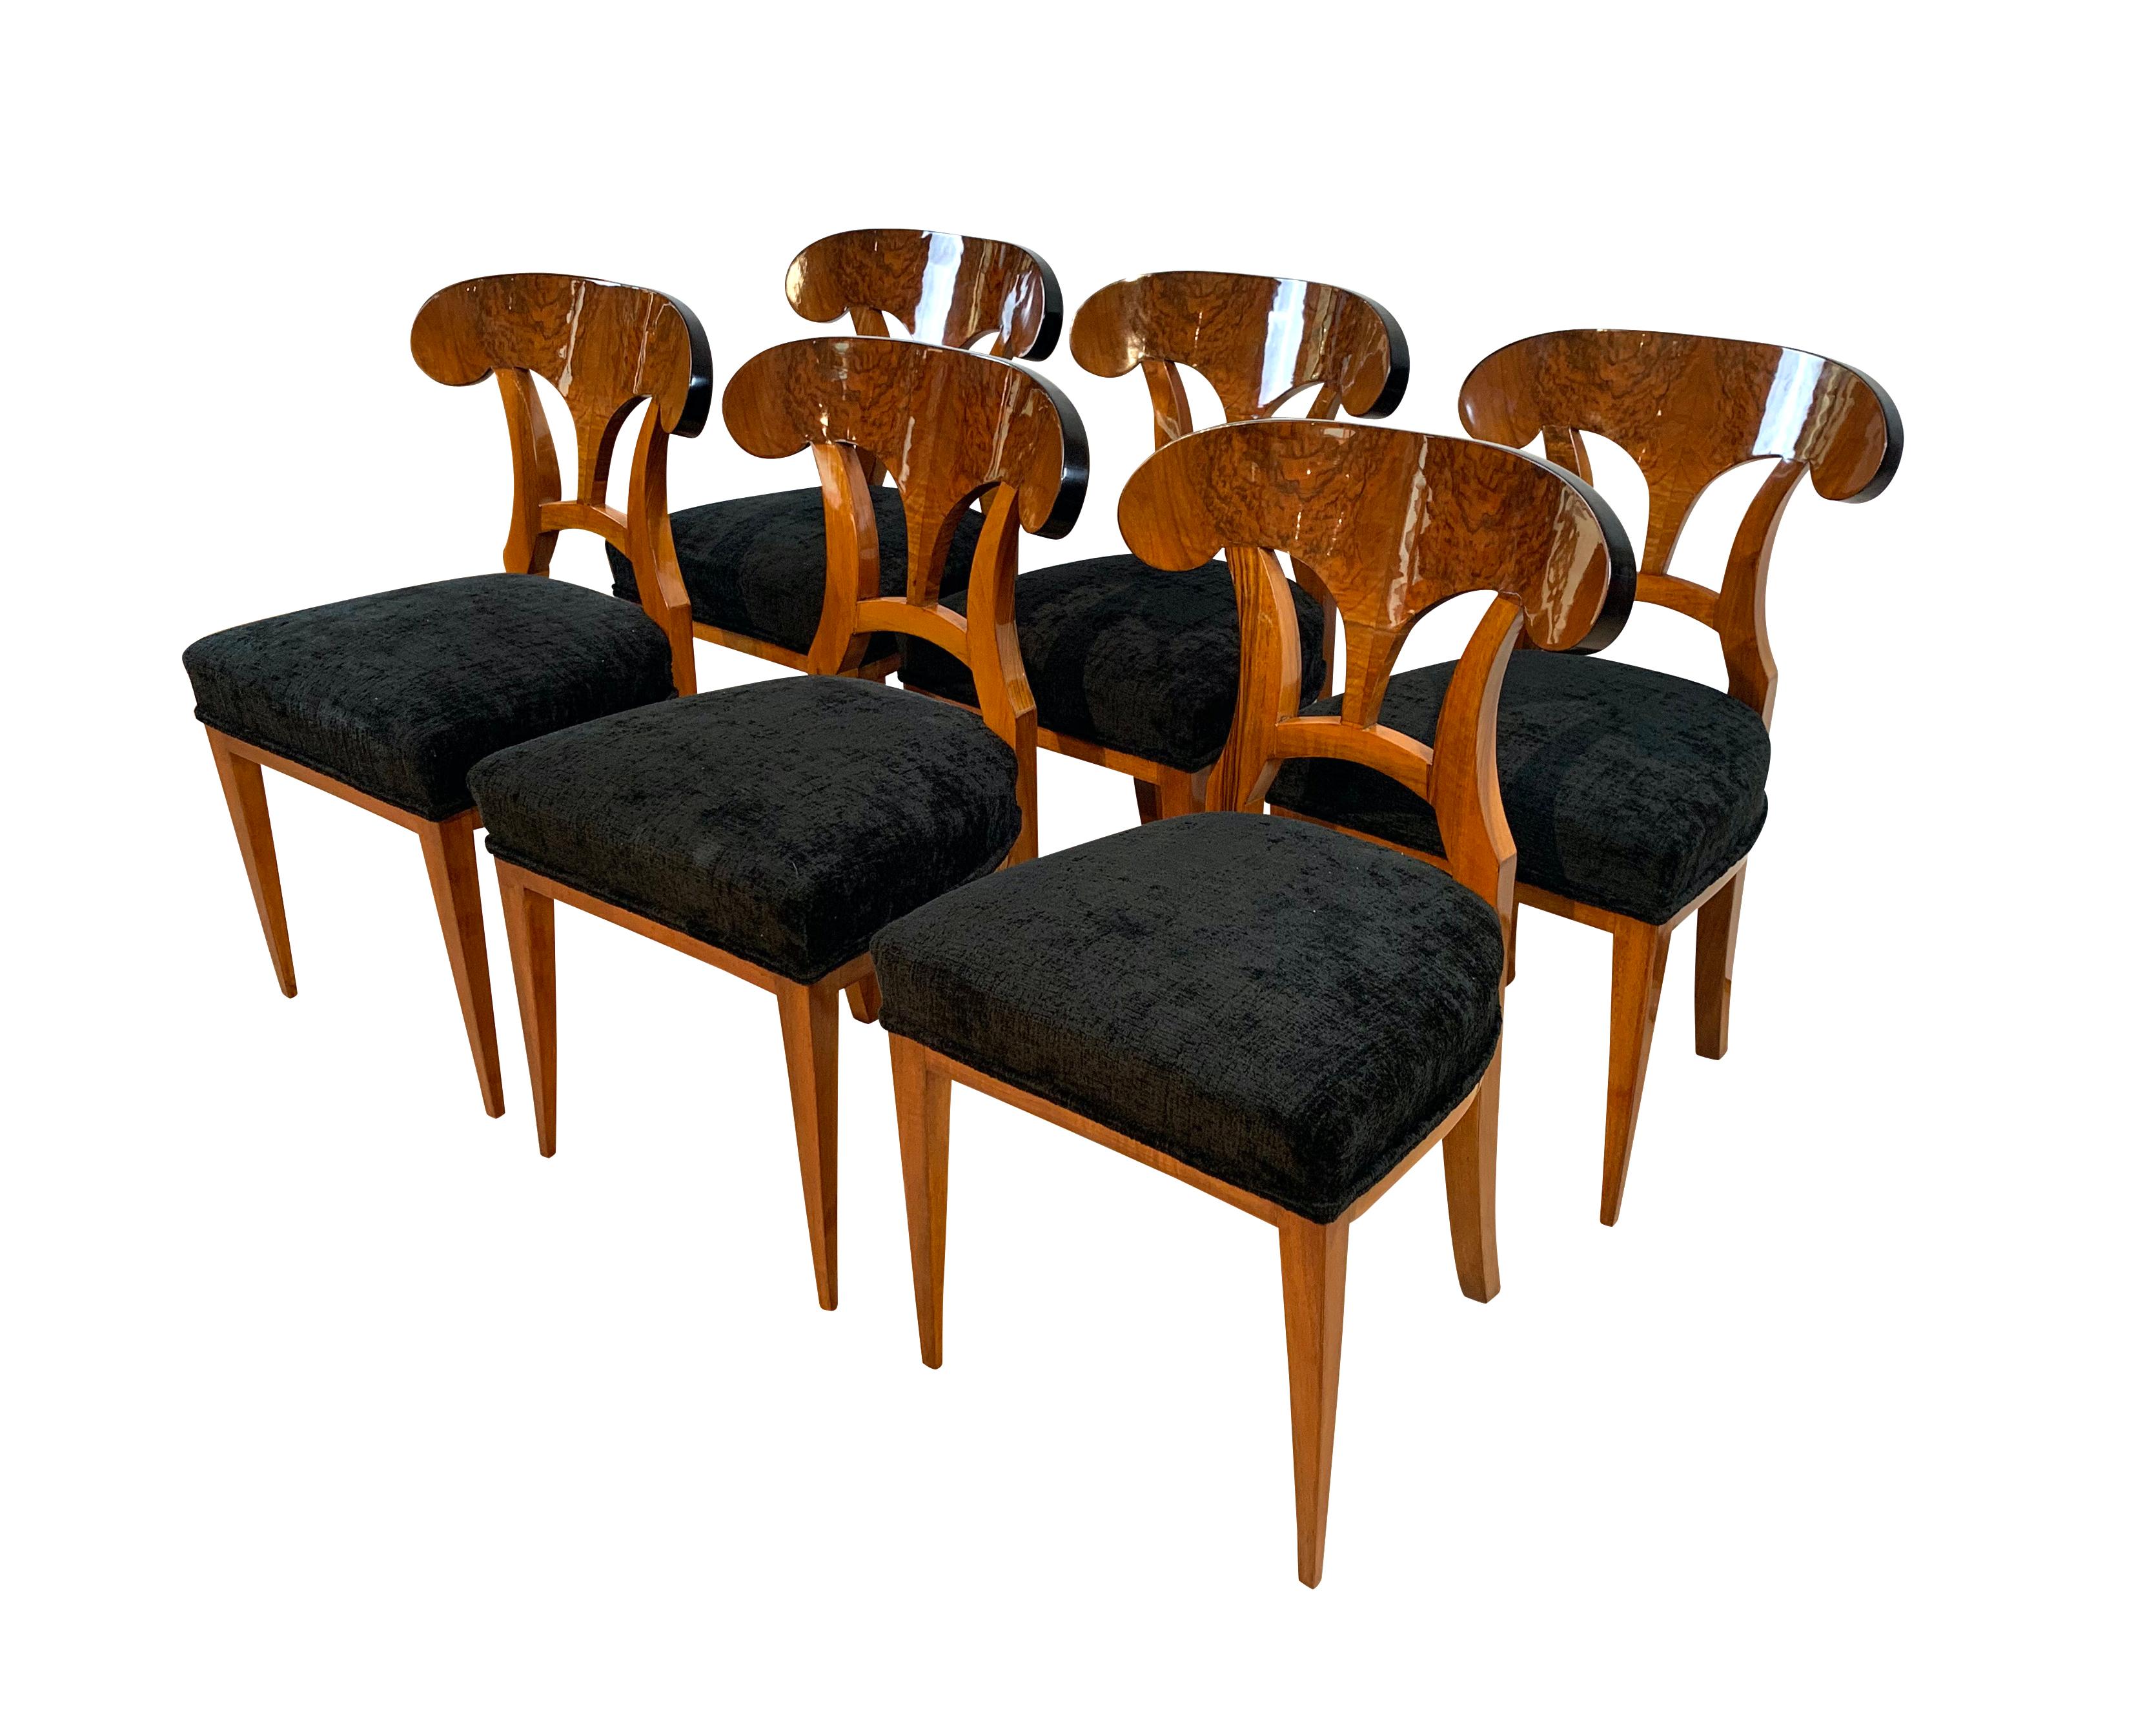 Set of six antique neoclassical Biedermeier shovel chairs from South Germany circa 1860.

Book-matched walnut veneer and solid wood. Hand-polished with shellac (French polish). 
The chairs are from the second half of the 19th century (so called